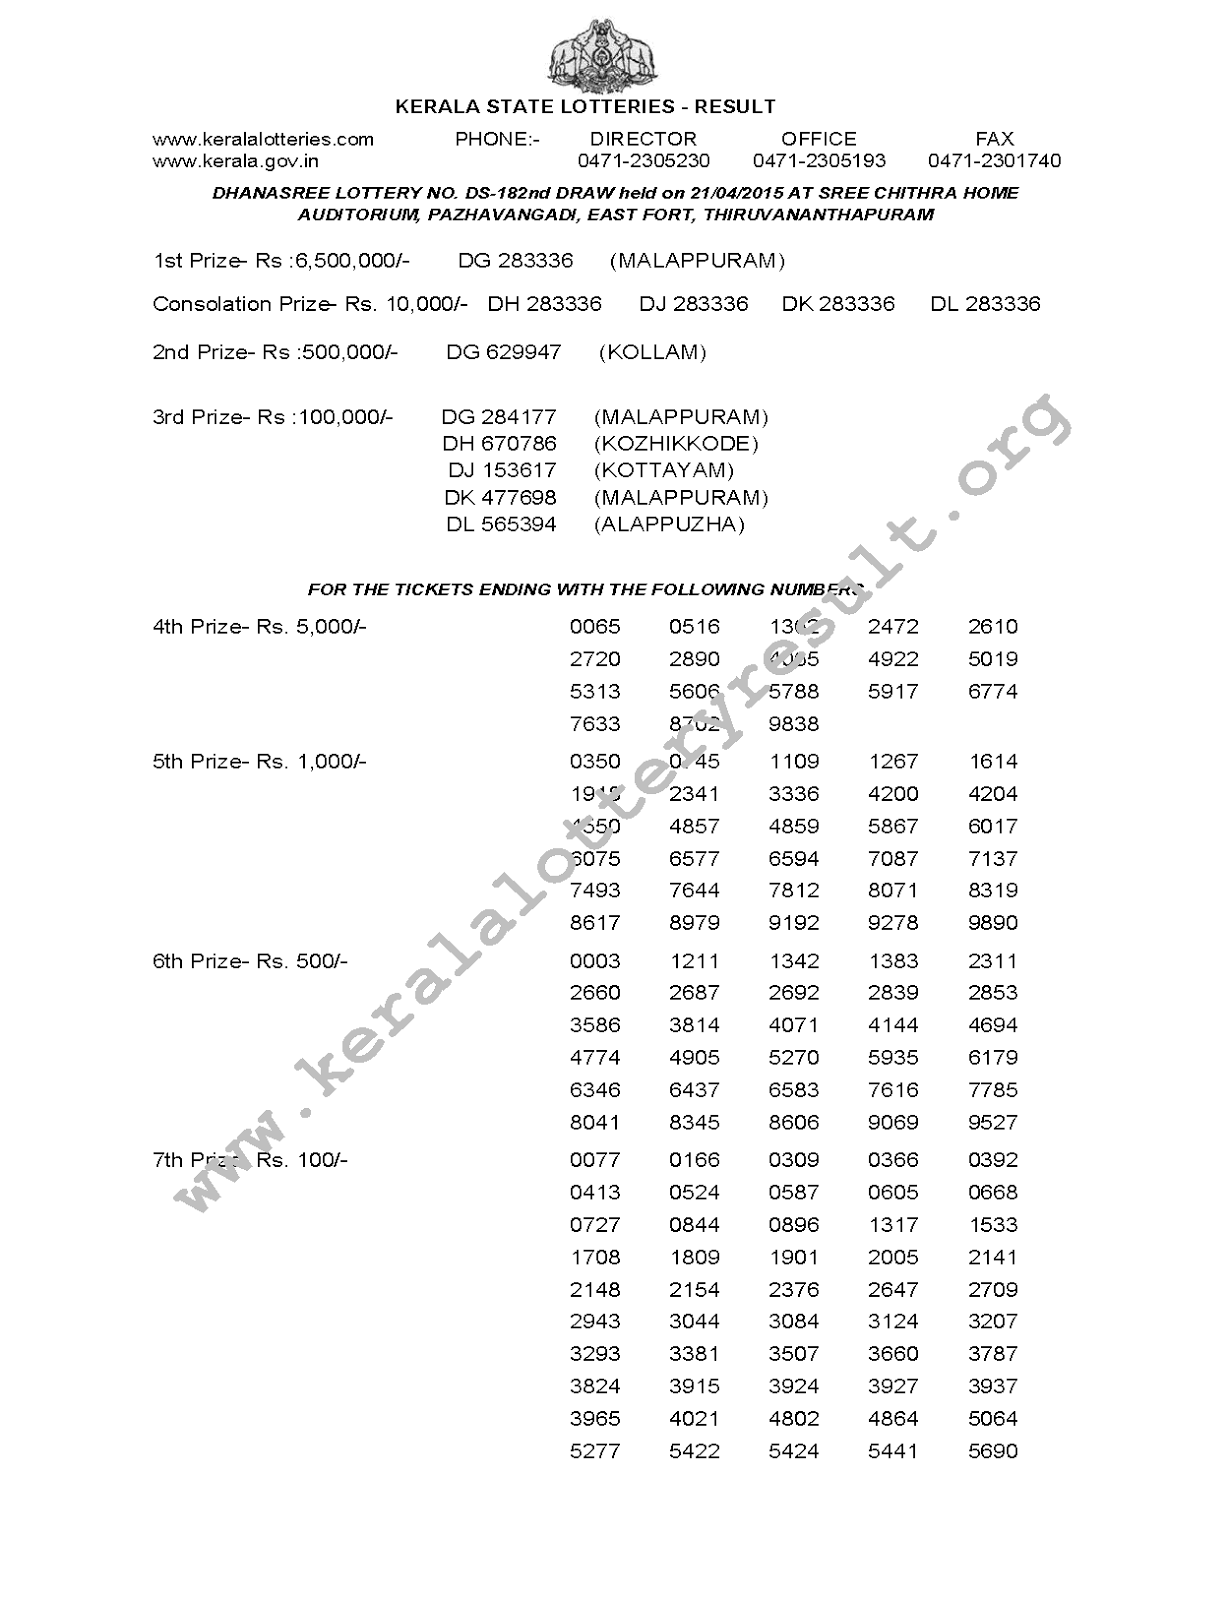 DHANASREE Lottery DS 182 Result 21-4-2015